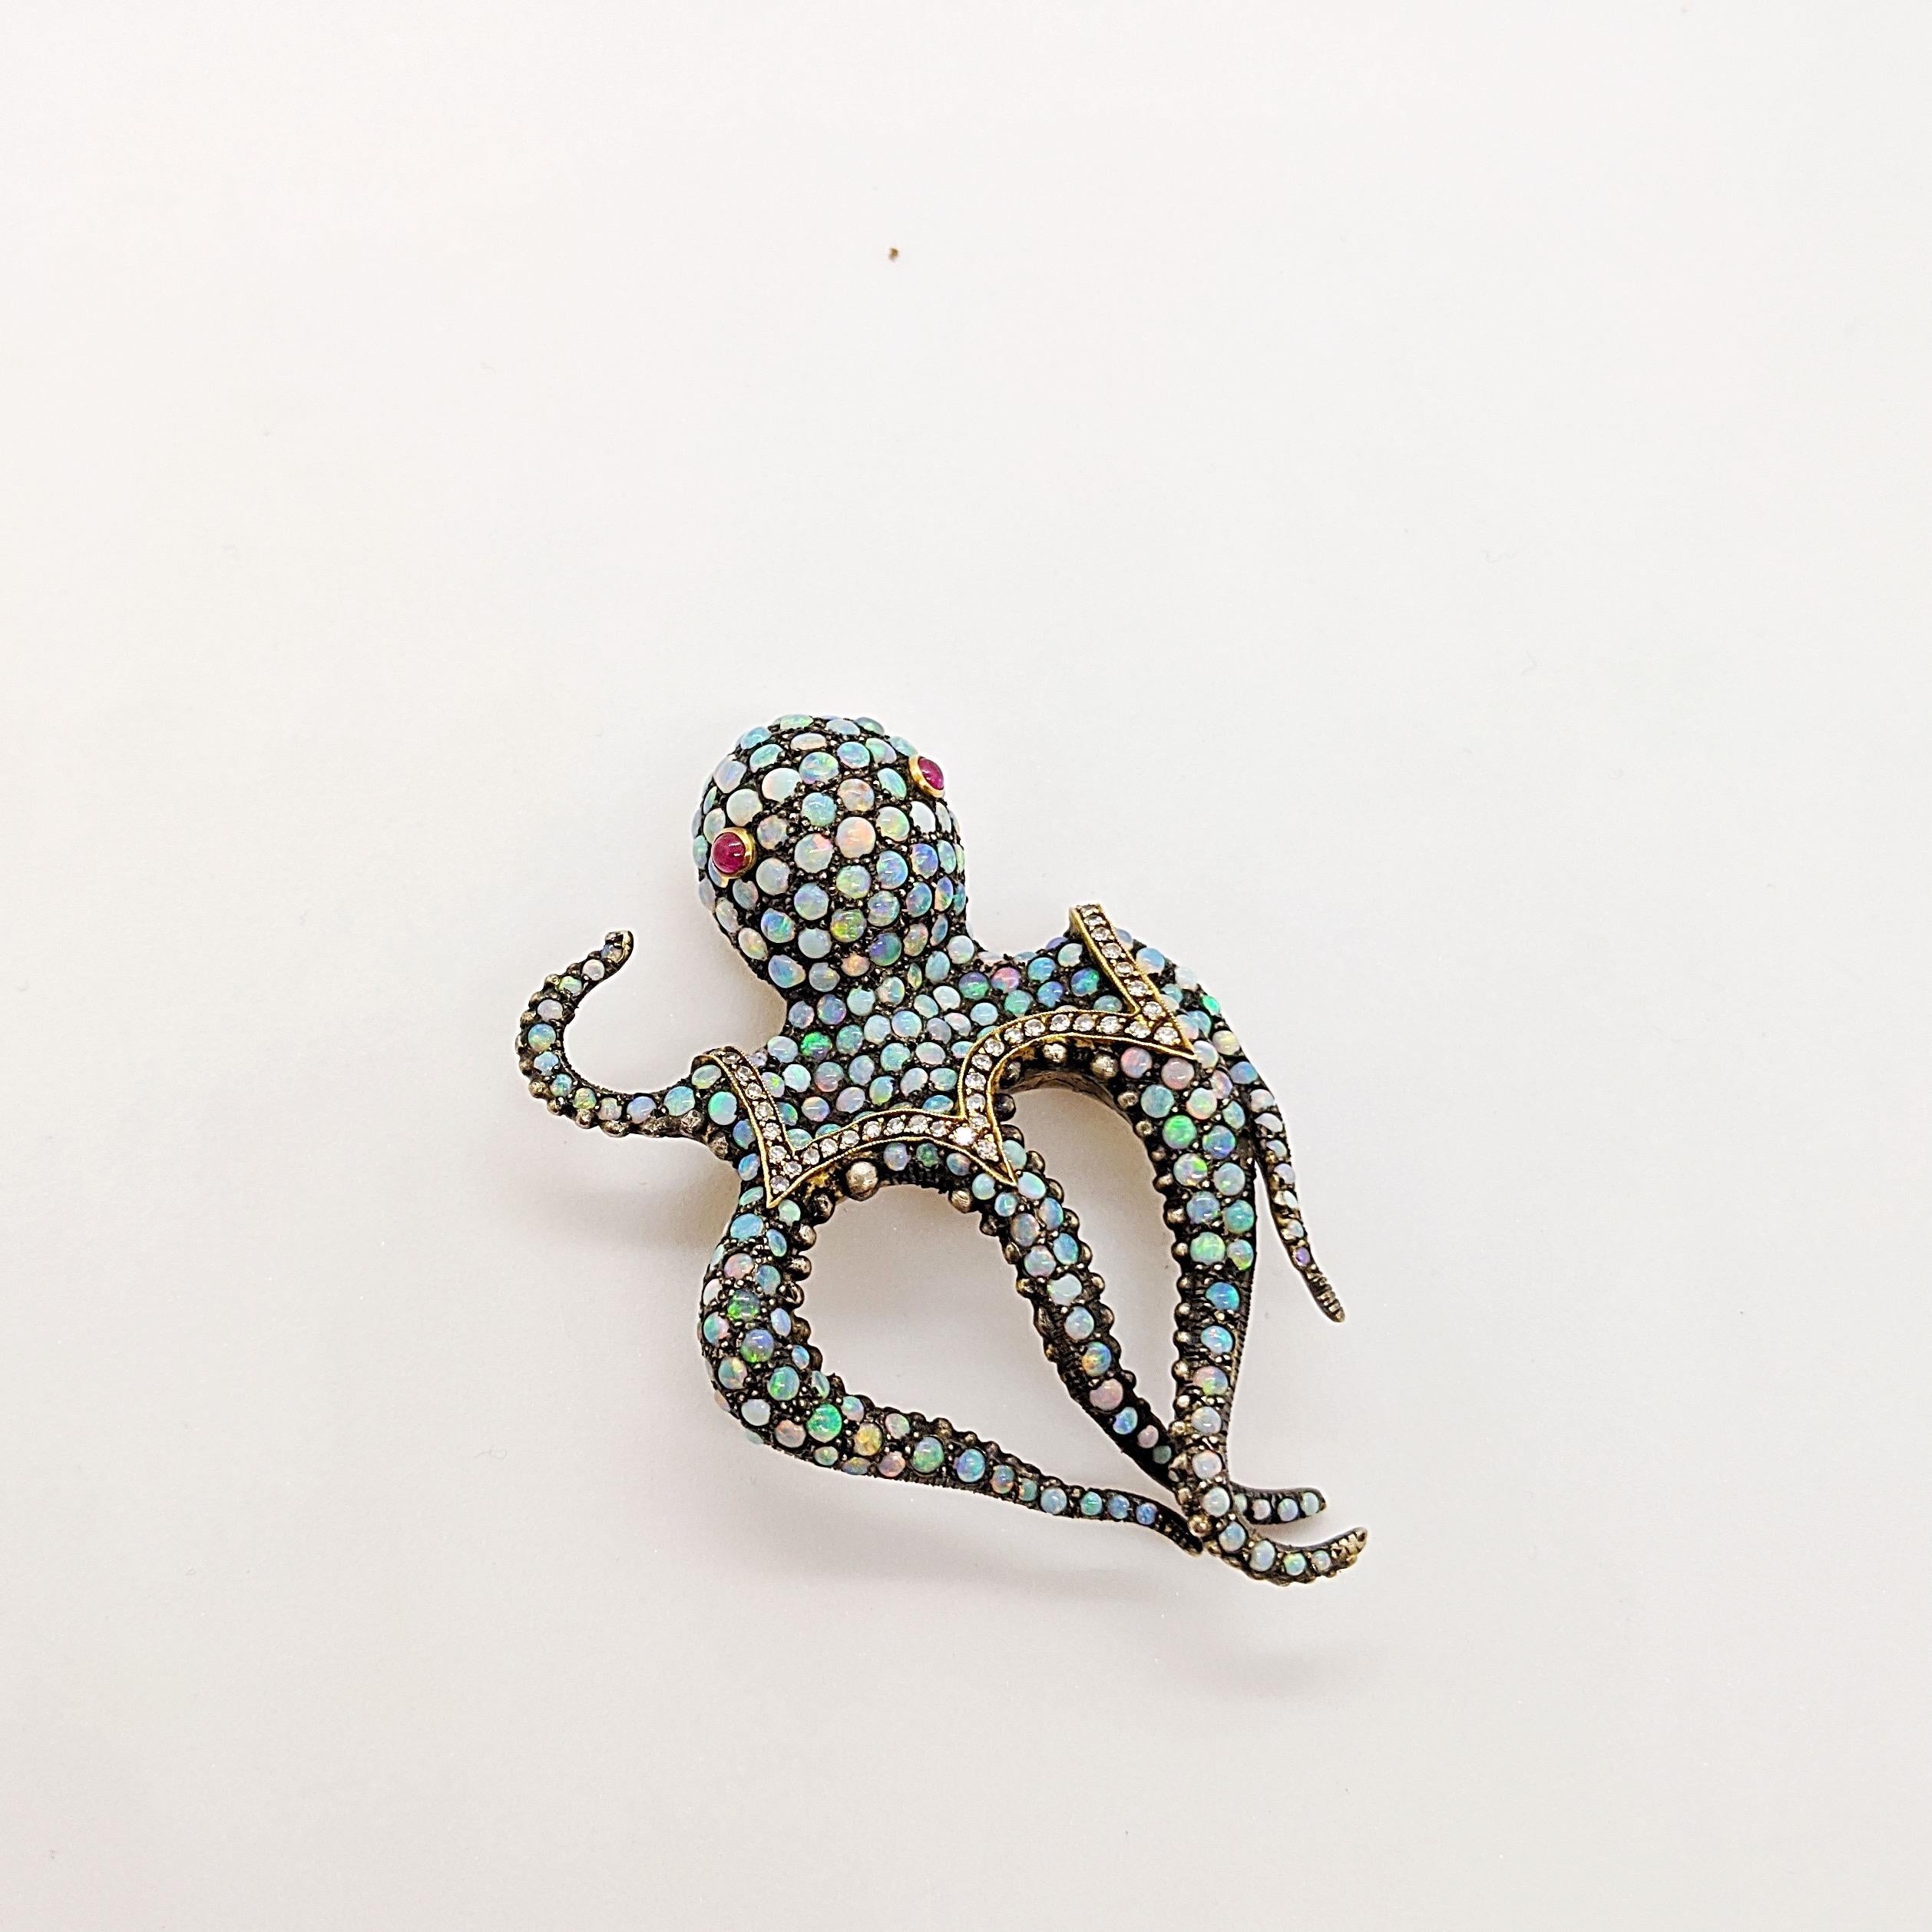 Artisan 18KT Gold & Sterling Silver Octopus Brooch with 7.10Ct. Opals, Diamonds & Rubies